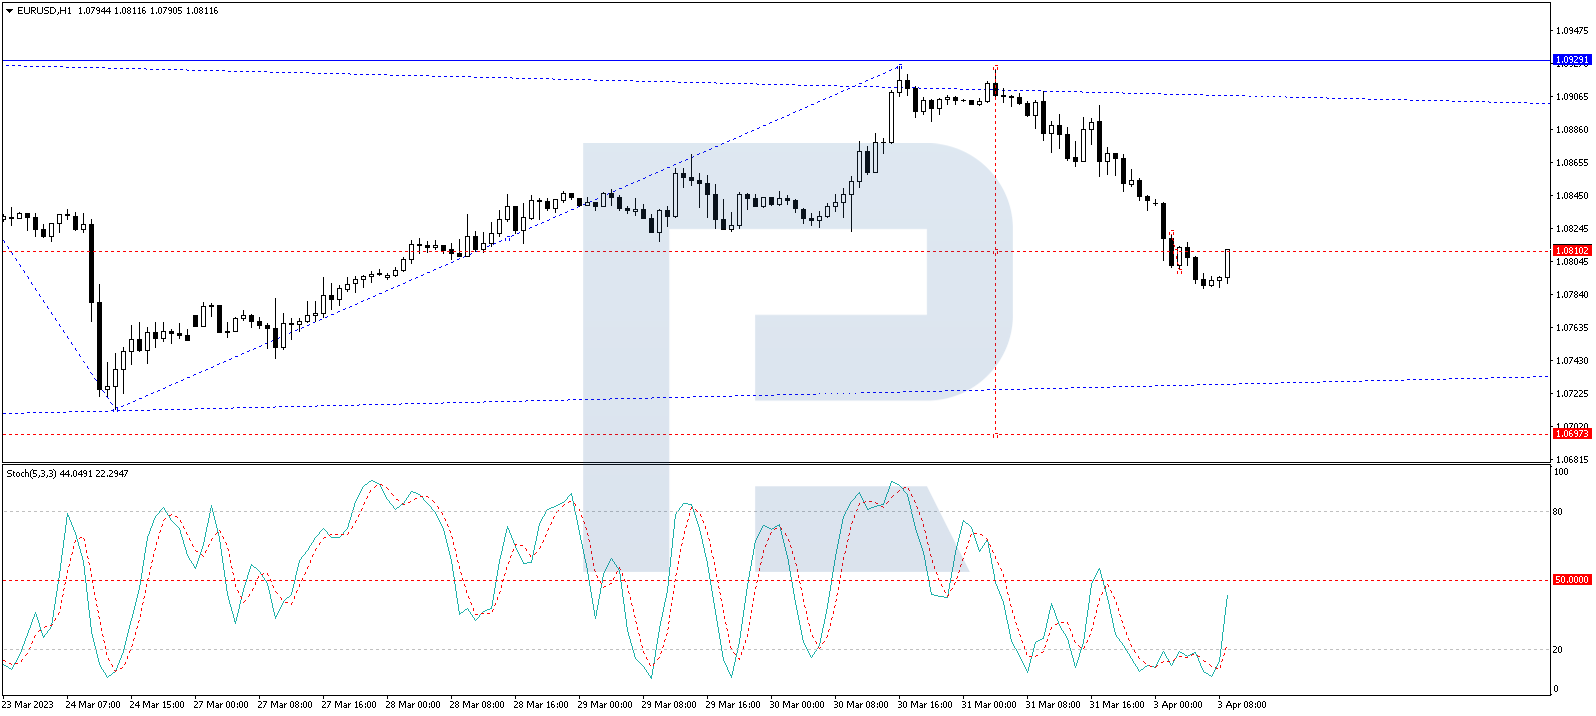 On H1, the EUR/USD pair has completed the structure of a declining wave to 1.0788